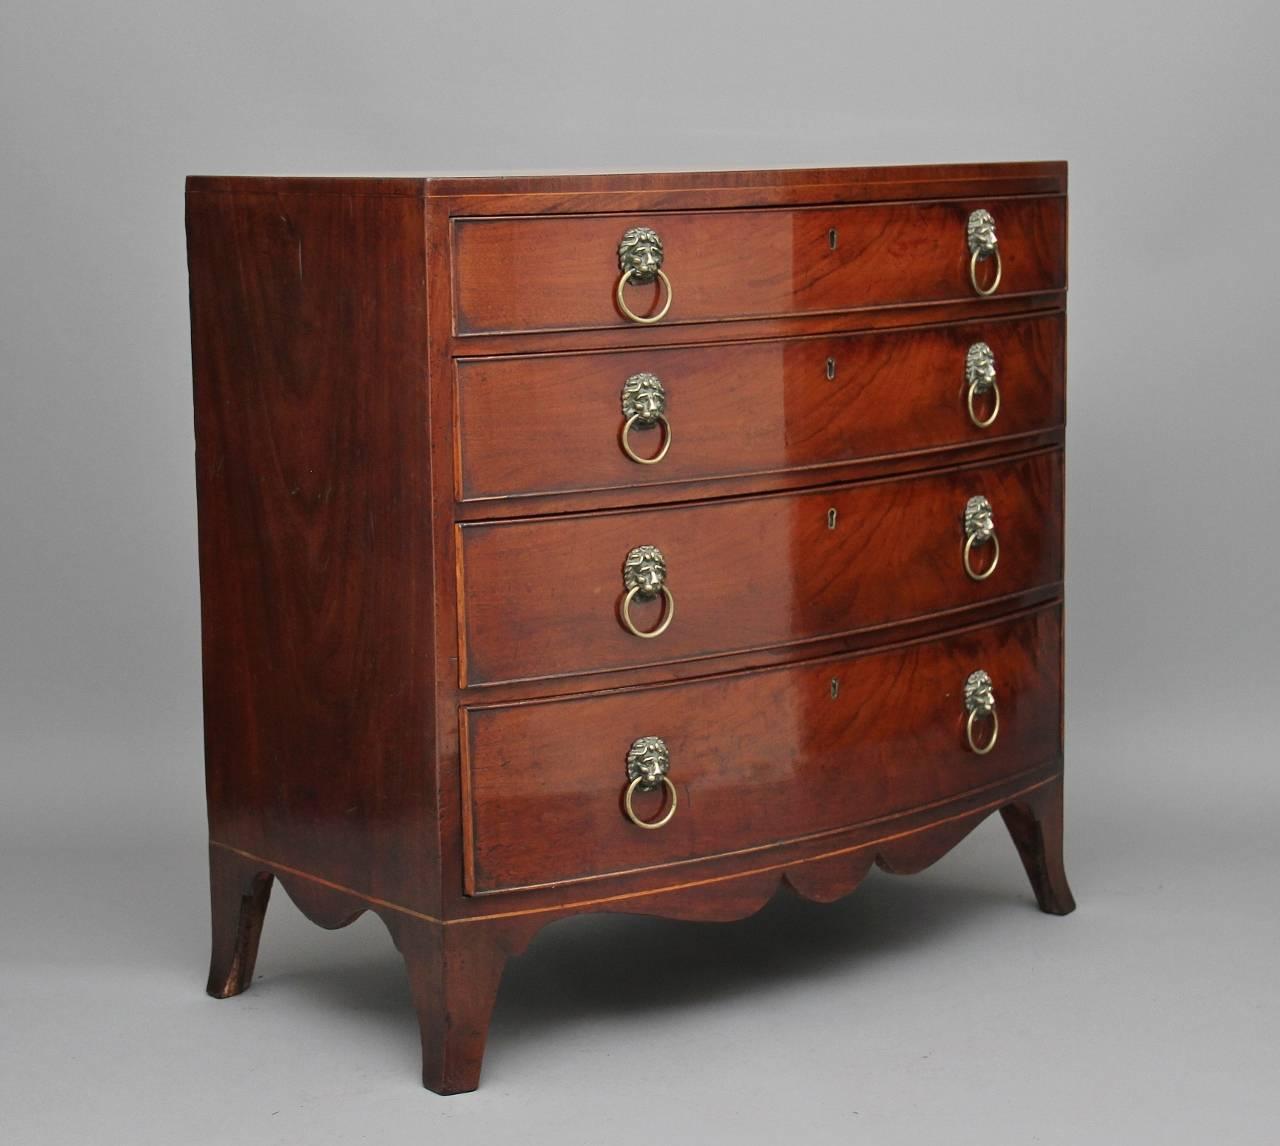 Early 19th century mahogany bowfront chest of drawers of good proportions, the top inlaid, with four long graduated oak lined drawers with original brass lion head handles, with a shaped apron standing on splay feet, circa 1800.